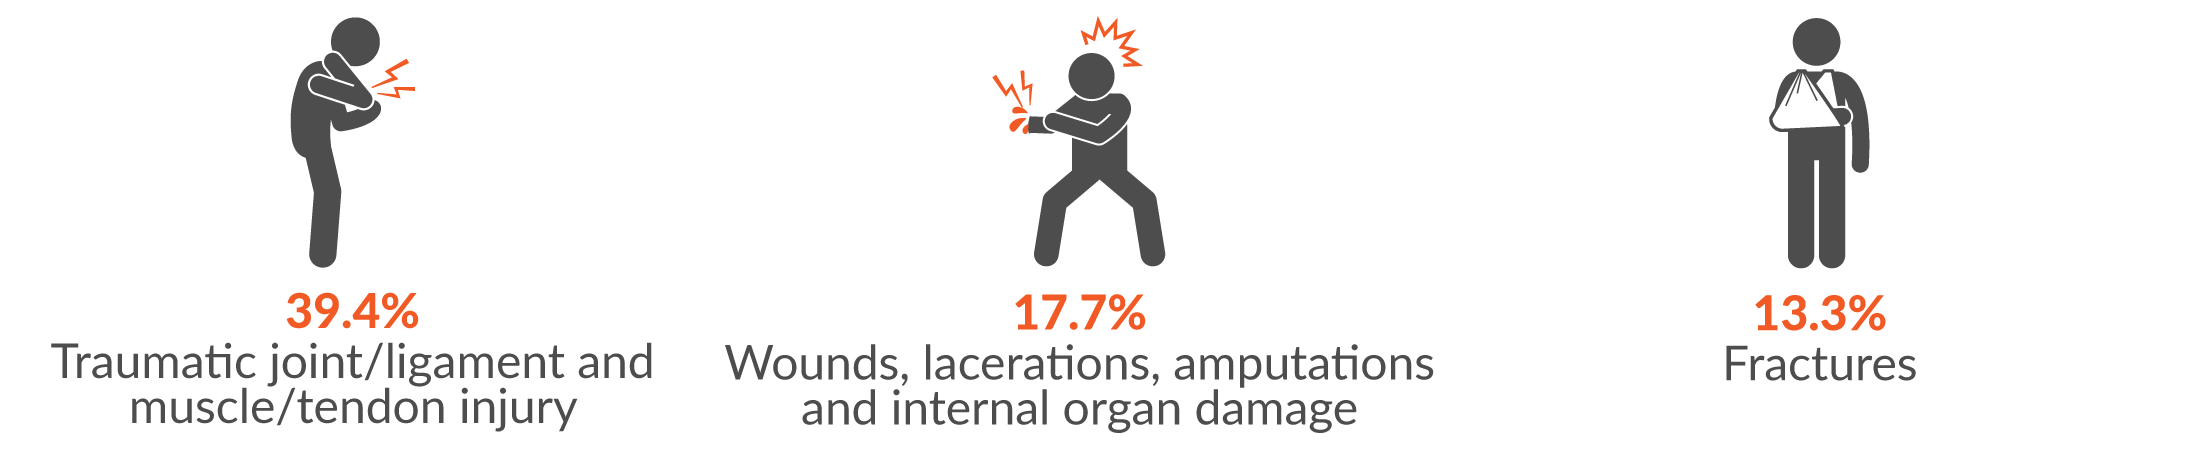 This infographic shows the main three injury groups for serious injuries were 39.4% Traumatic joint/ligament and muscle/tendon injury; 17.7% Wounds, lacerations; amputations and internal organ damage; and 13.3% Fractures.